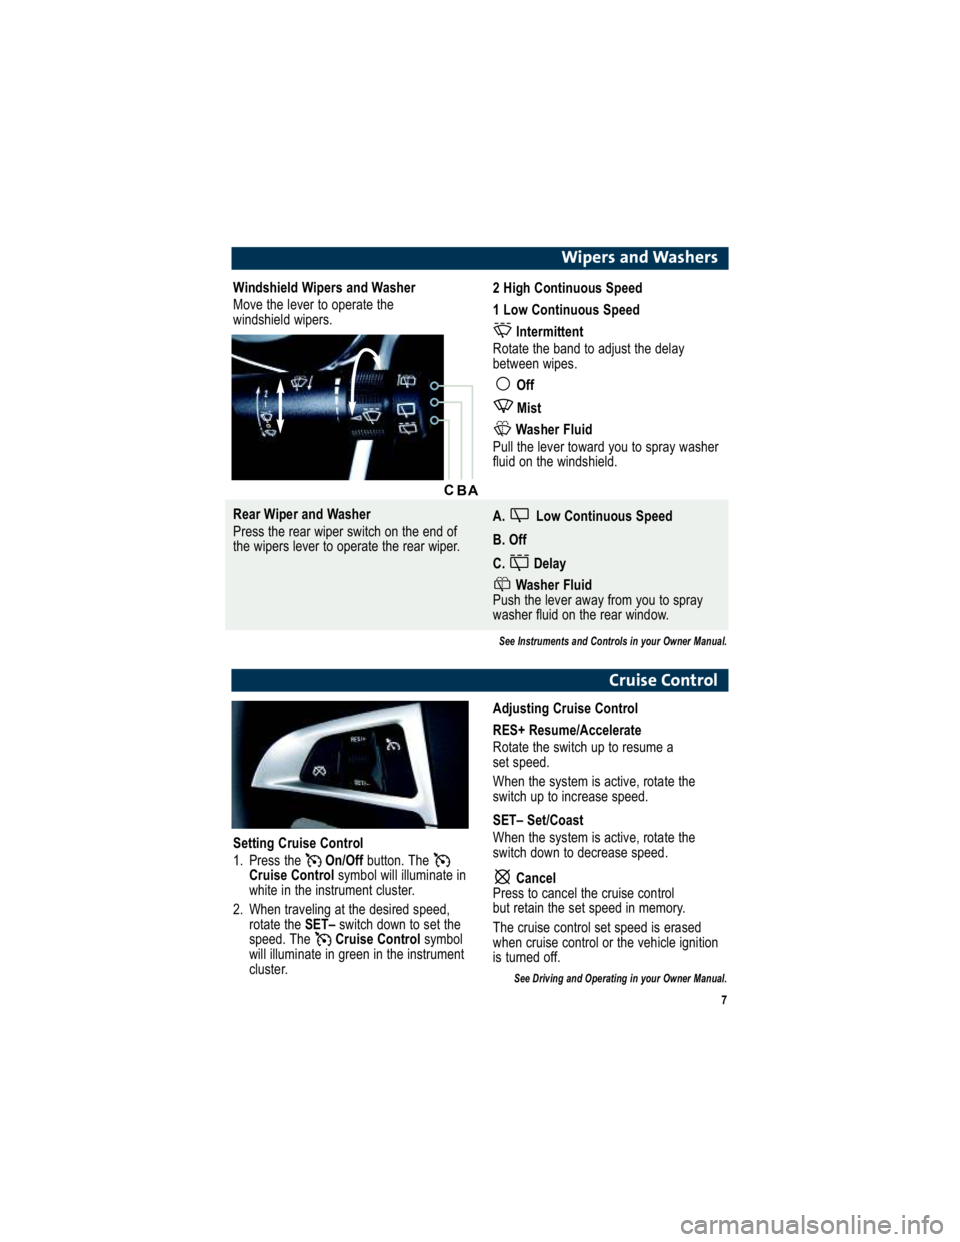 GMC TERRAIN 2010  Owners Manual 7
Wipers and Washers
Windshield Wipers and Washer 
Move the lever to operate the  
windshield wipers.2 High Continuous Speed 
1 Low Continuous SpeedIntermittent
Rotate the band to adjust the delay 
be